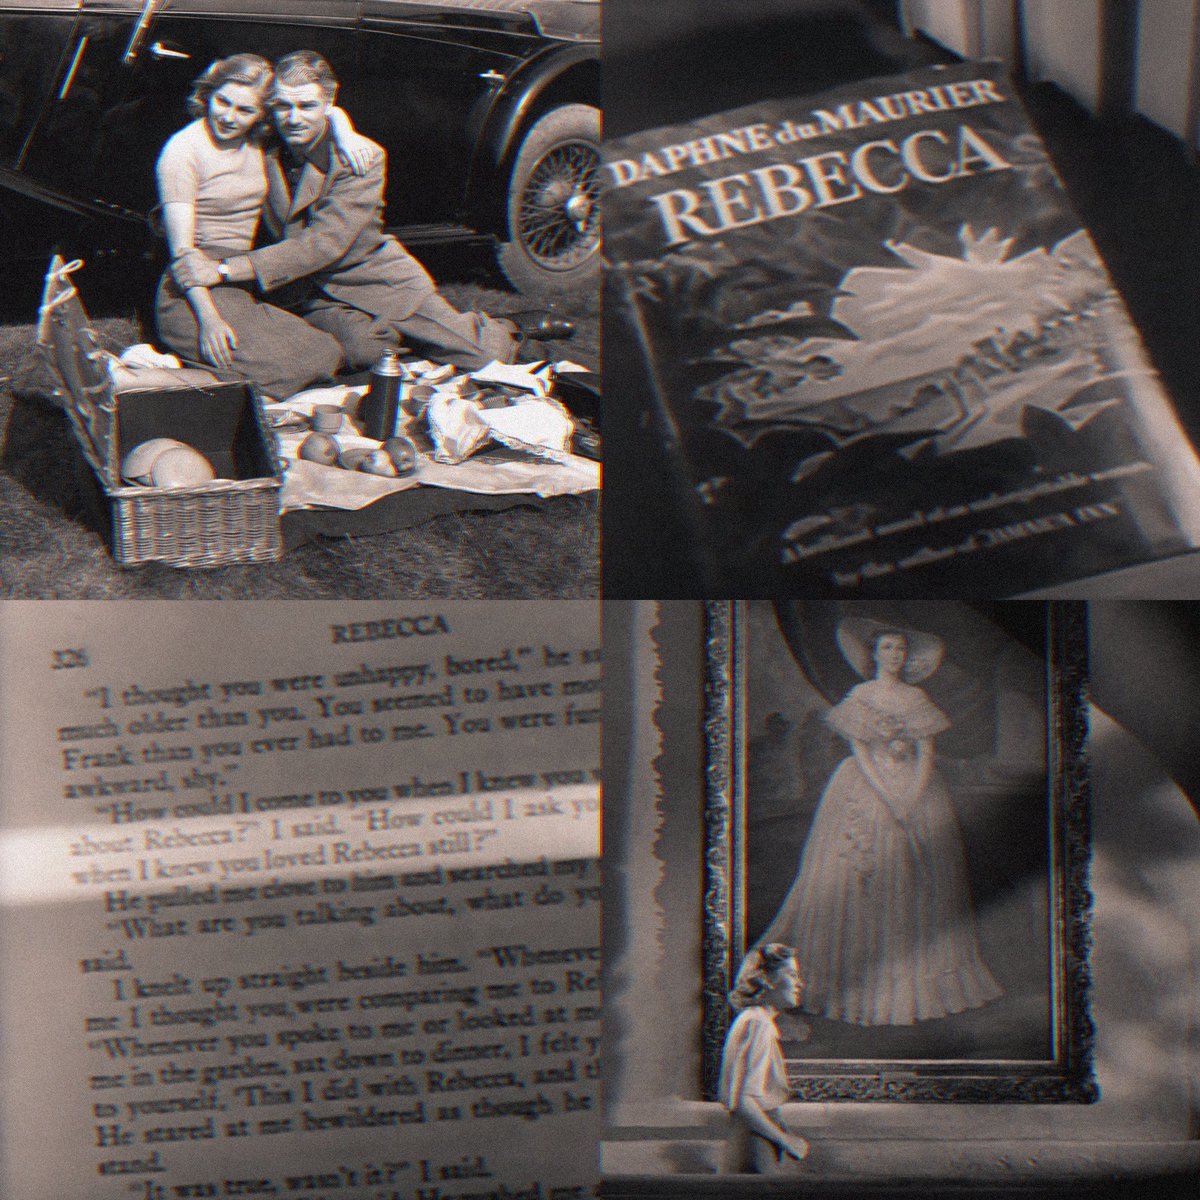 🎥 Rebecca (1940)
🎬 Alfred Hitchcock
⭐️ Laurence Olivier & Joan Fontaine
📚 Rebecca by Daphne du Maurier
#BooksInFilms #BooksInMovies #BooksOnScreen